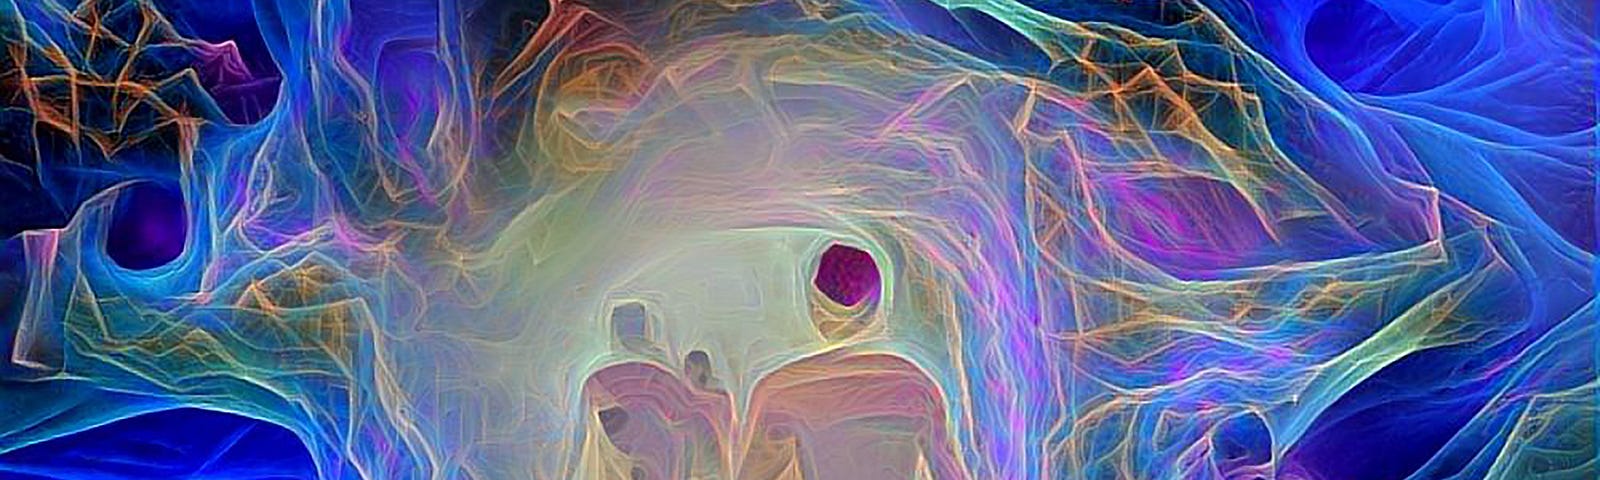 Image is titled “Souls Passing Through the Tunnel”